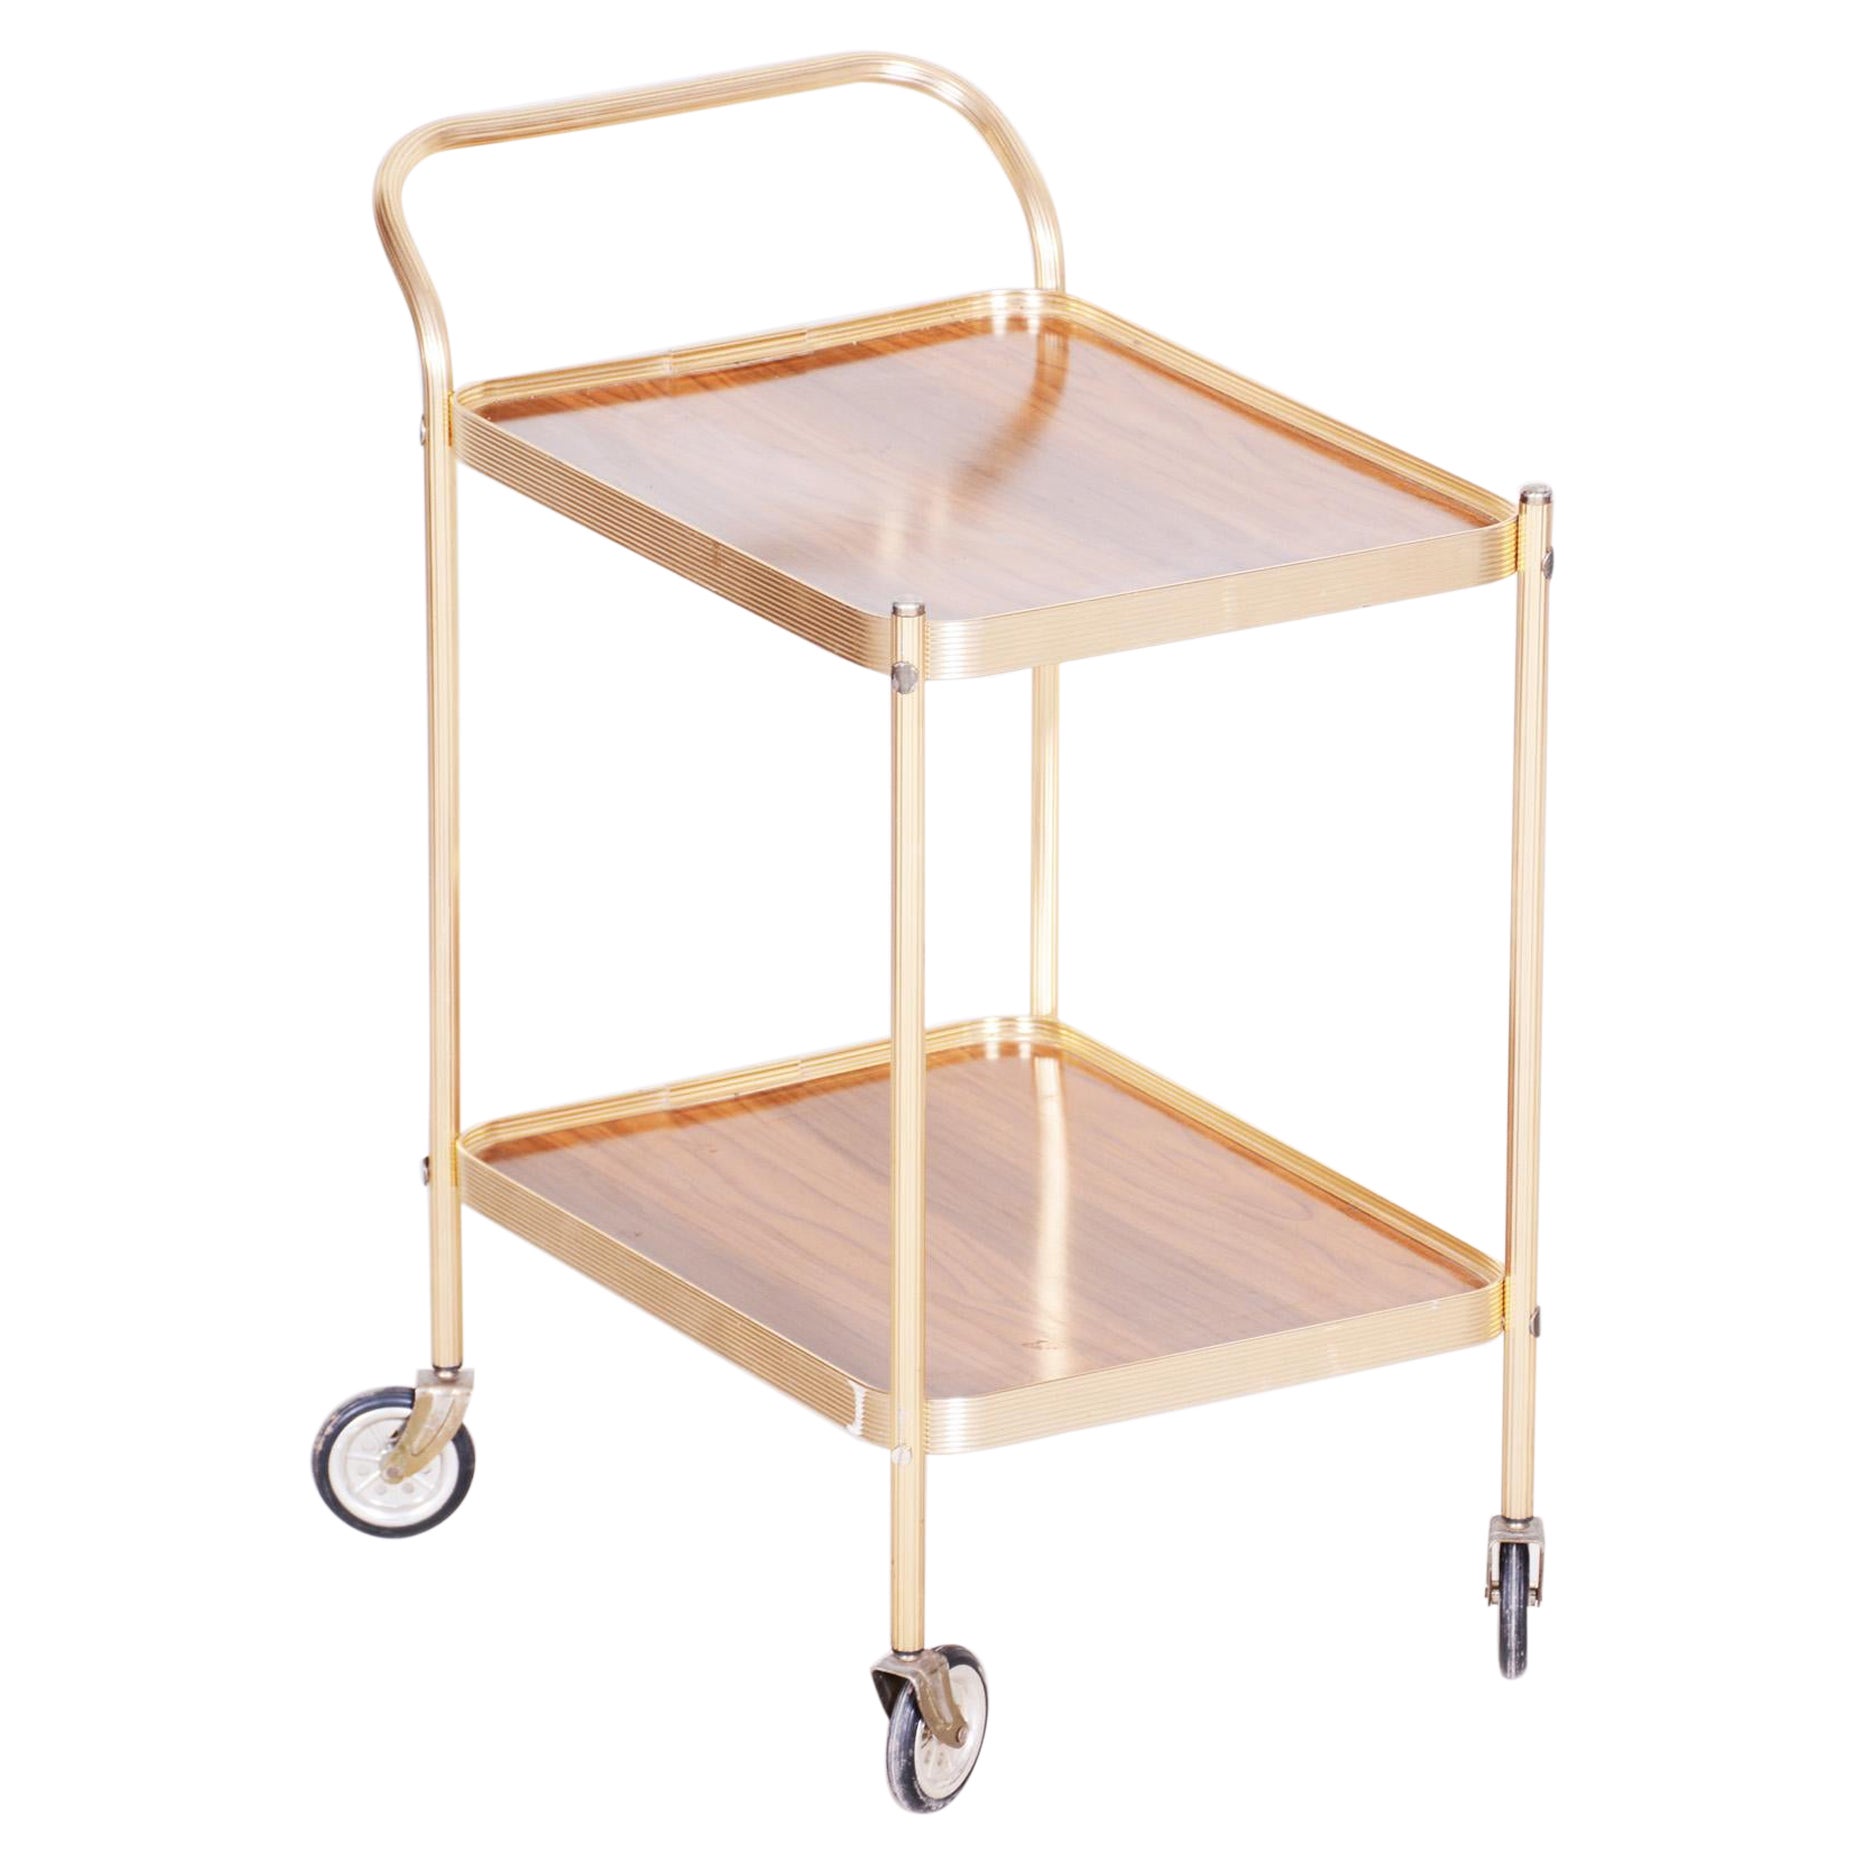 20th Century French Art Deco Trolley, Made Out of Brass Original Condition 1950s